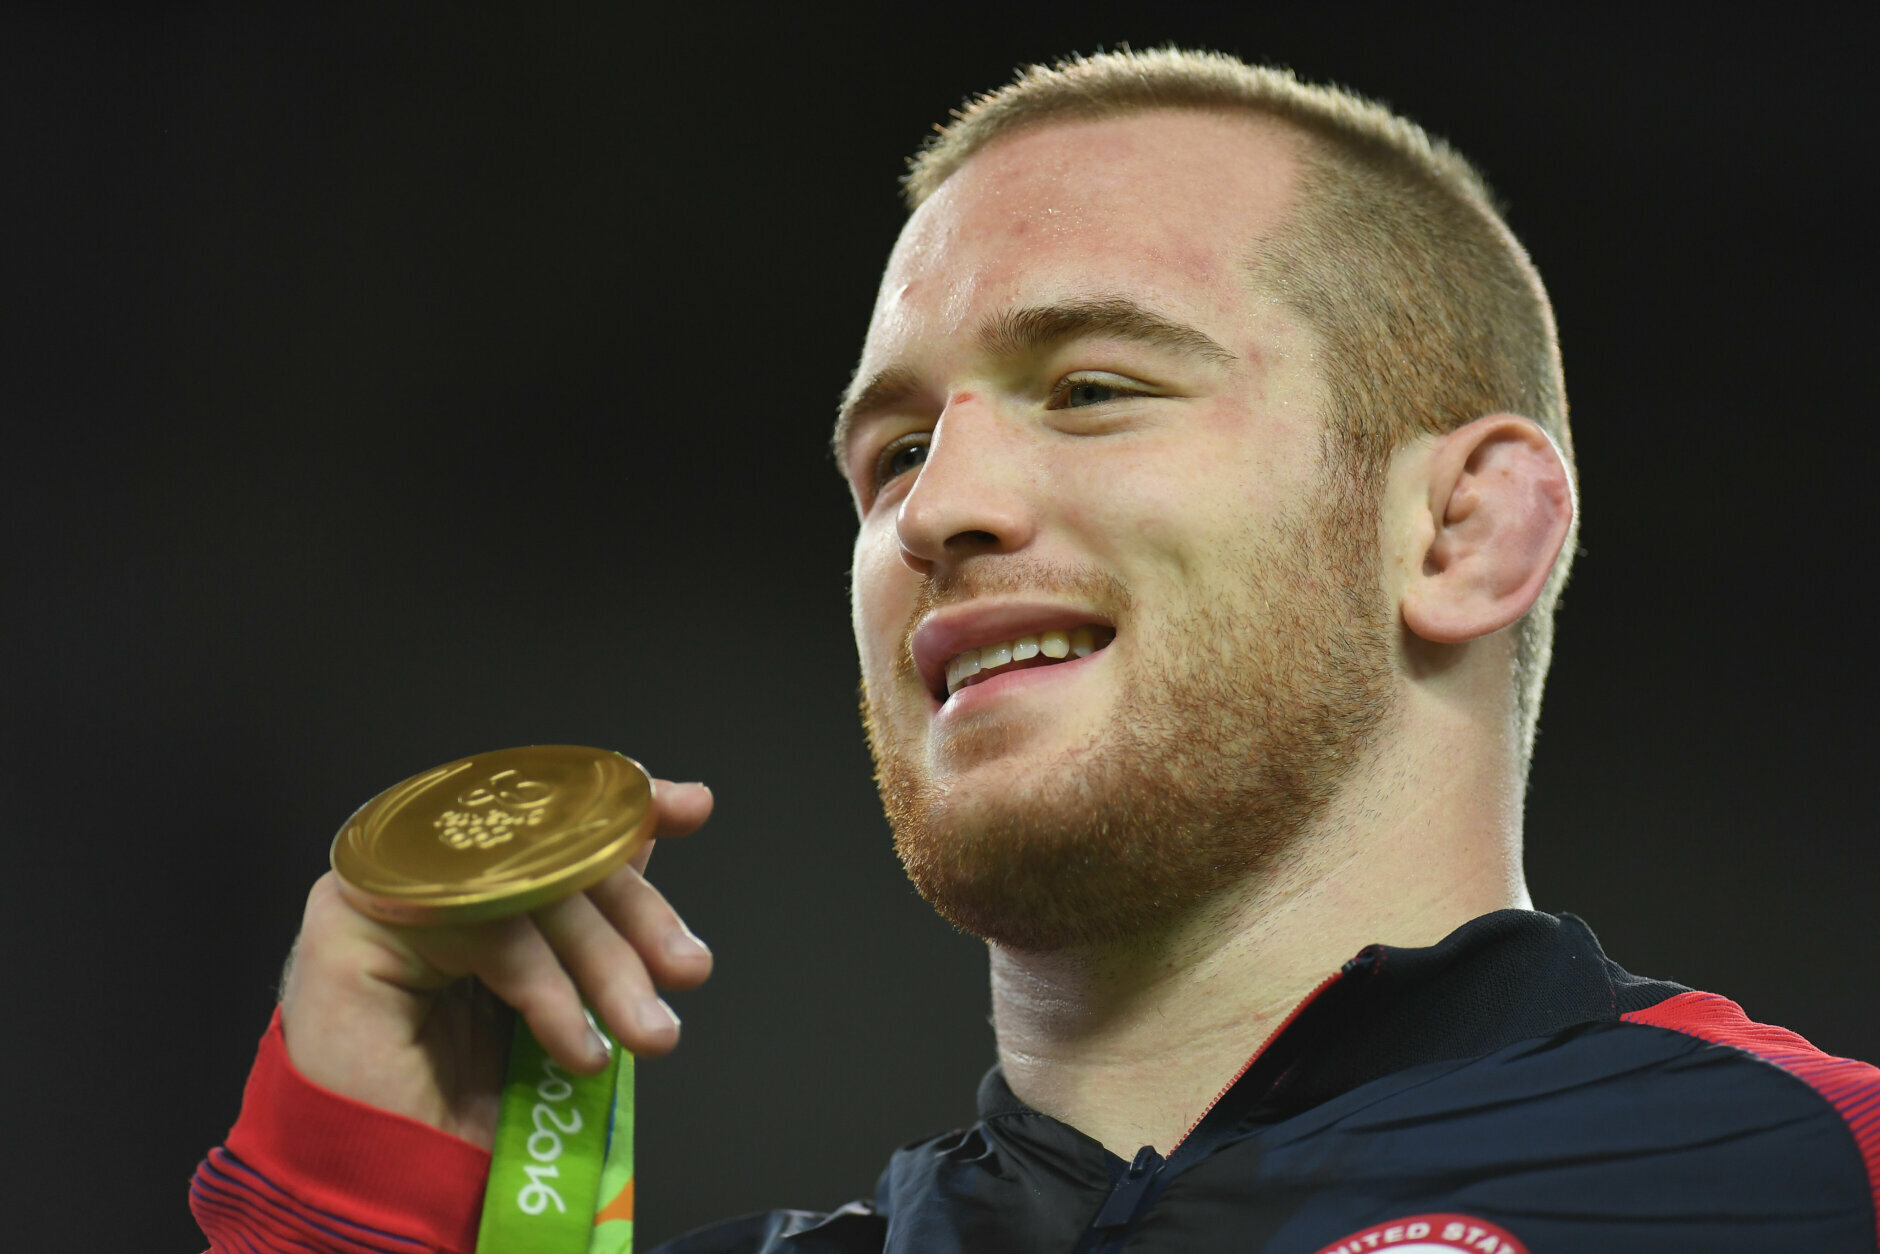 <p><strong>Kyle Snyder (Woodbine, Maryland) — Wrestling</strong></p>
<p><strong>Notable facts:</strong> The man known as &#8220;Captain America&#8221; has a wrestling resume that reads a lot like the fictional super soldier. After going undefeated in 179 high school matches at Our Lady of Good Counsel, Snyder went on to earn a gold medal in the 2016 Summer Games in Rio, becoming the youngest wrestler to win the NCAA, World and Olympic titles in the same year. He&#8217;s also the first Olympic gold medalist to return to college to win an NCAA title, earning two more championships at Ohio State. (<a href="https://olympics.com/en/featured-news/five-interesting-facts-wrestling-olympic-champion-kyle-snyder" target="_blank" rel="noopener">Click here to read more about Snyder</a>.)</p>
<p><strong>Competition: </strong>Men&#8217;s freestyle wrestling — Aug. 6</p>
